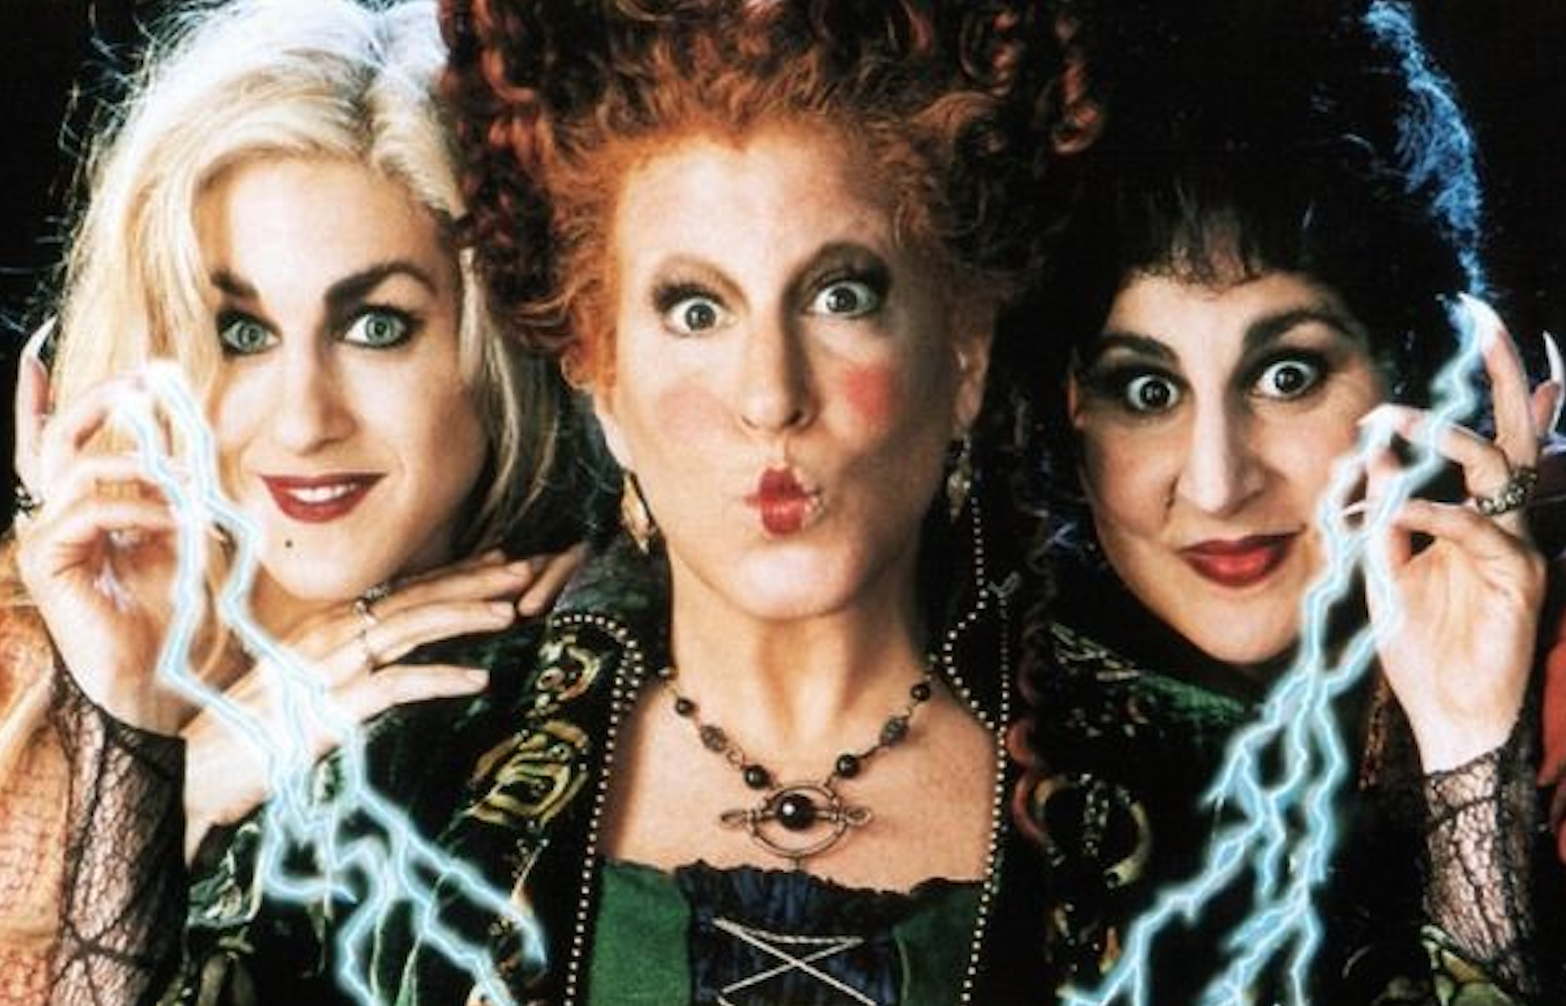 How The Sanderson Sisters Became Witches | Mystic Halloween Blog